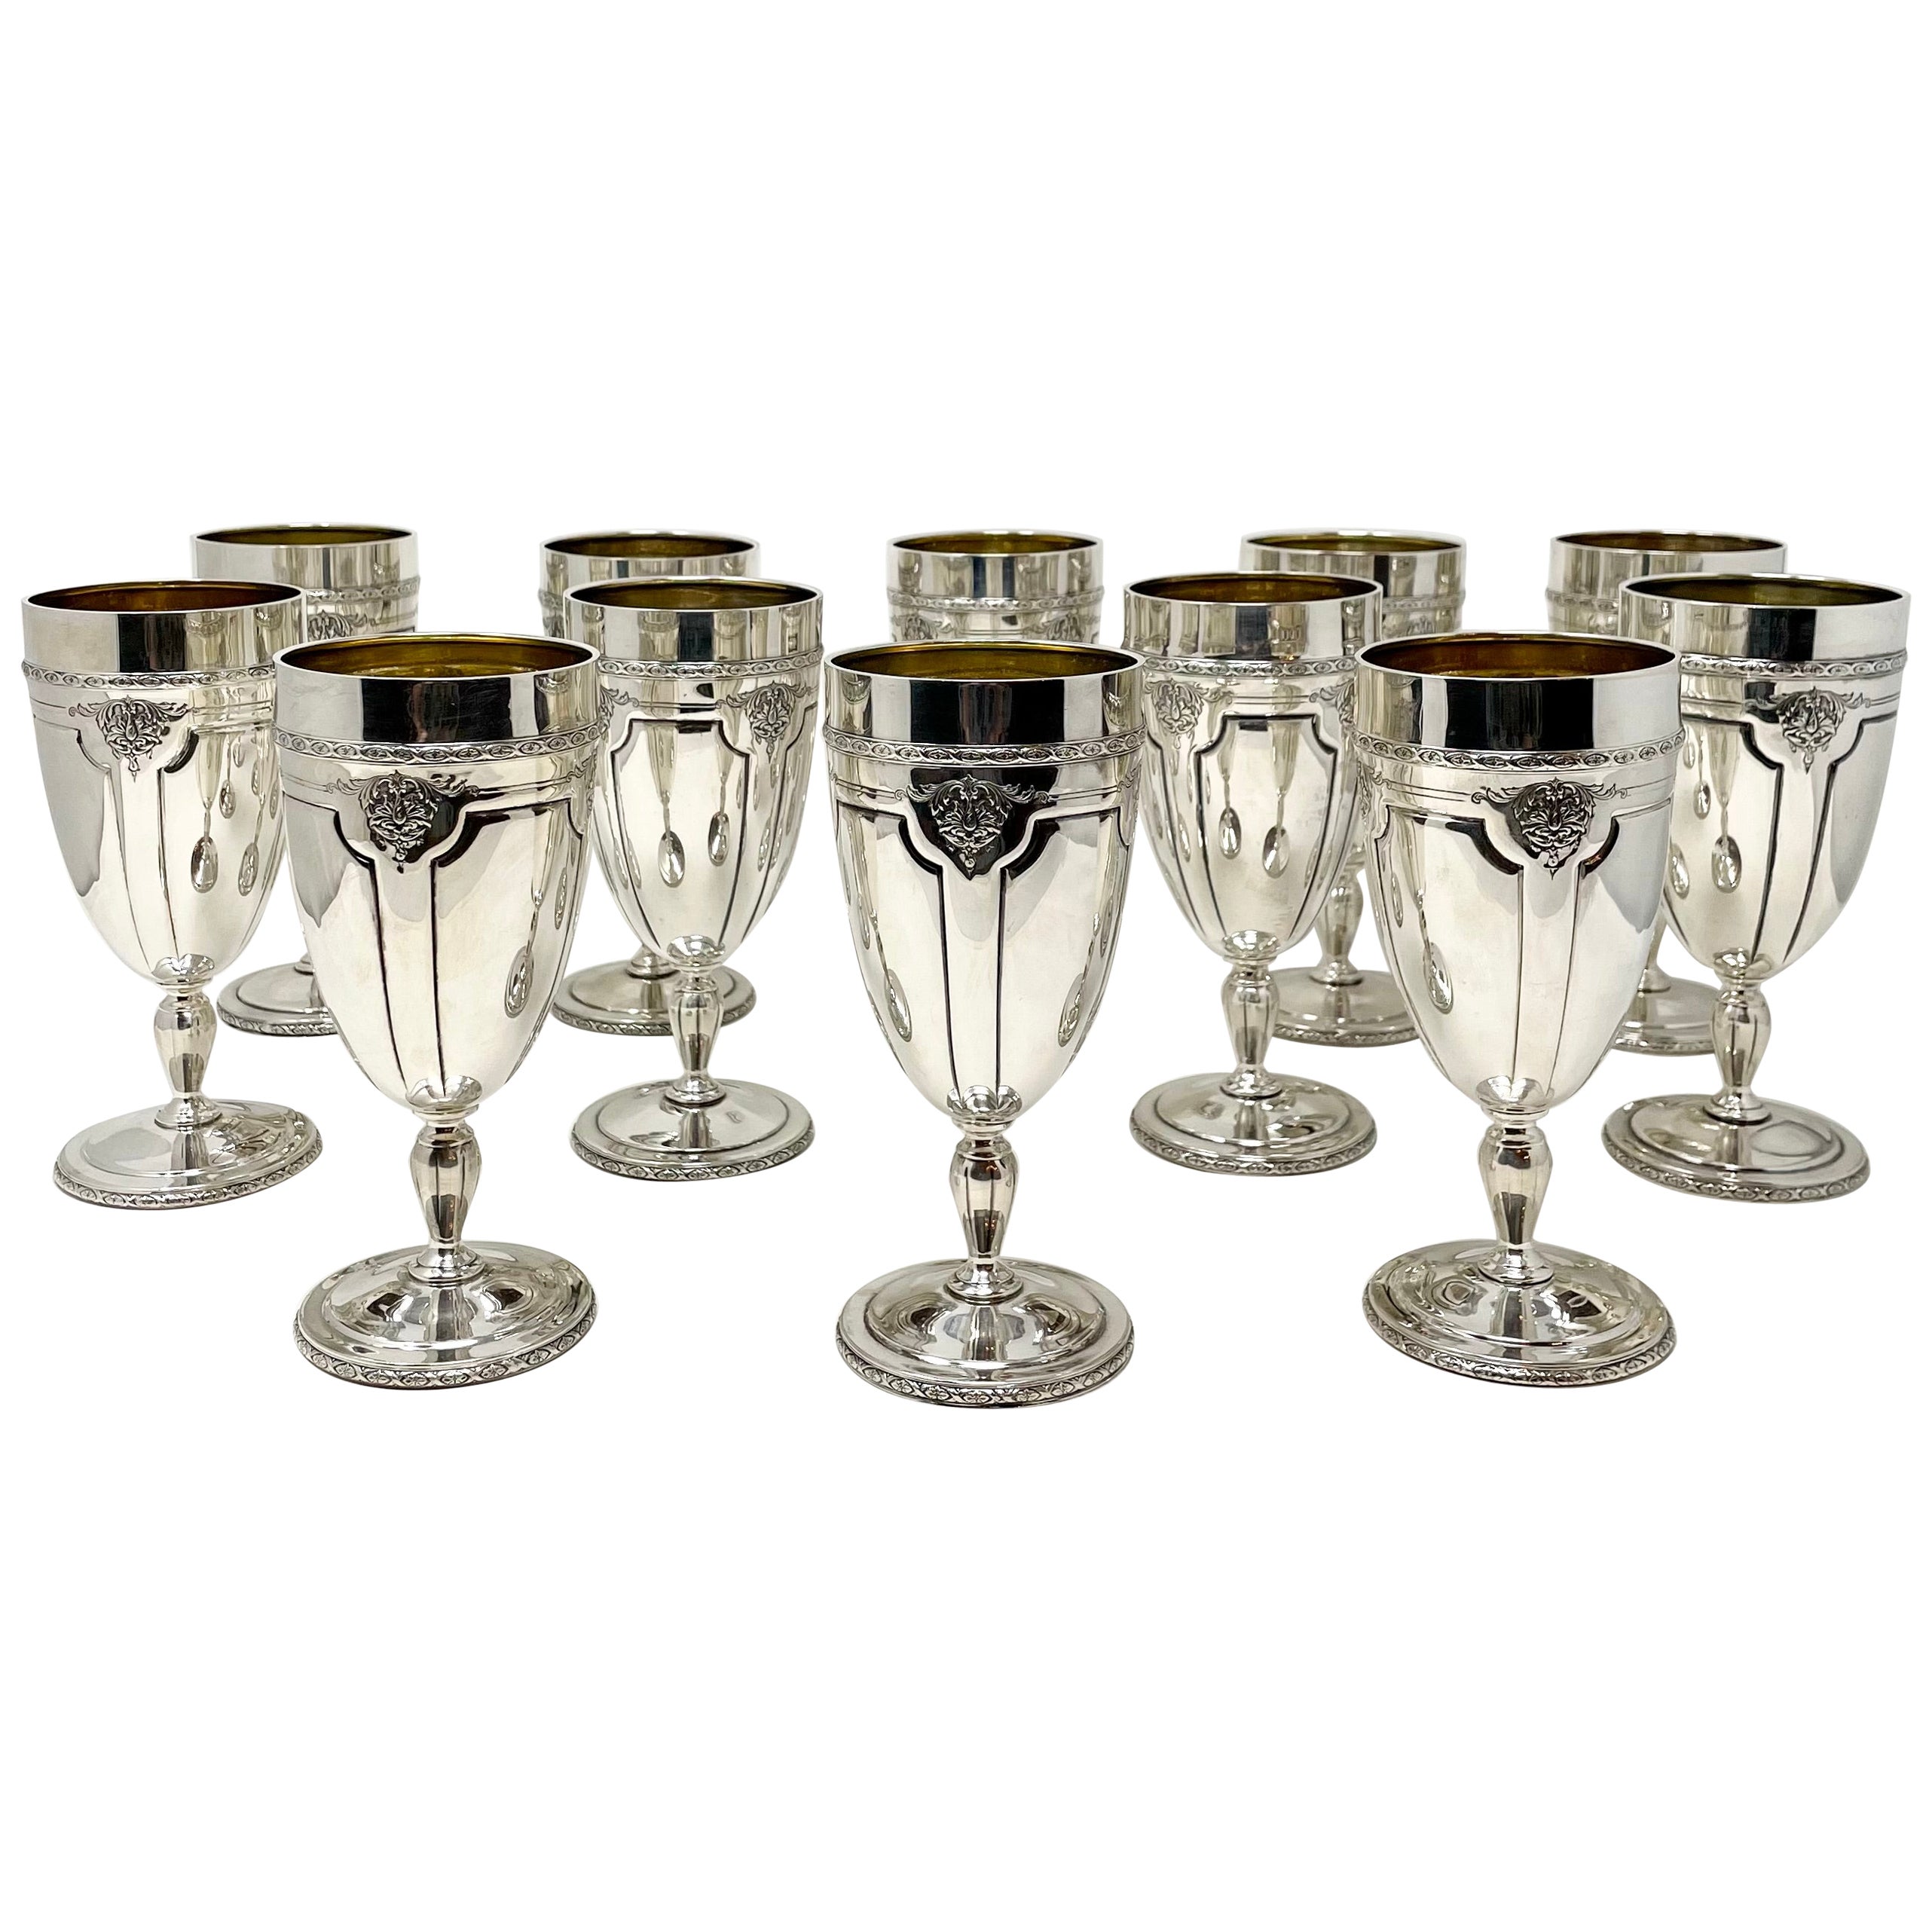 Set of 12 Estate American Sterling Silver "Towle Co." Water Goblets, Ca. 1950-60